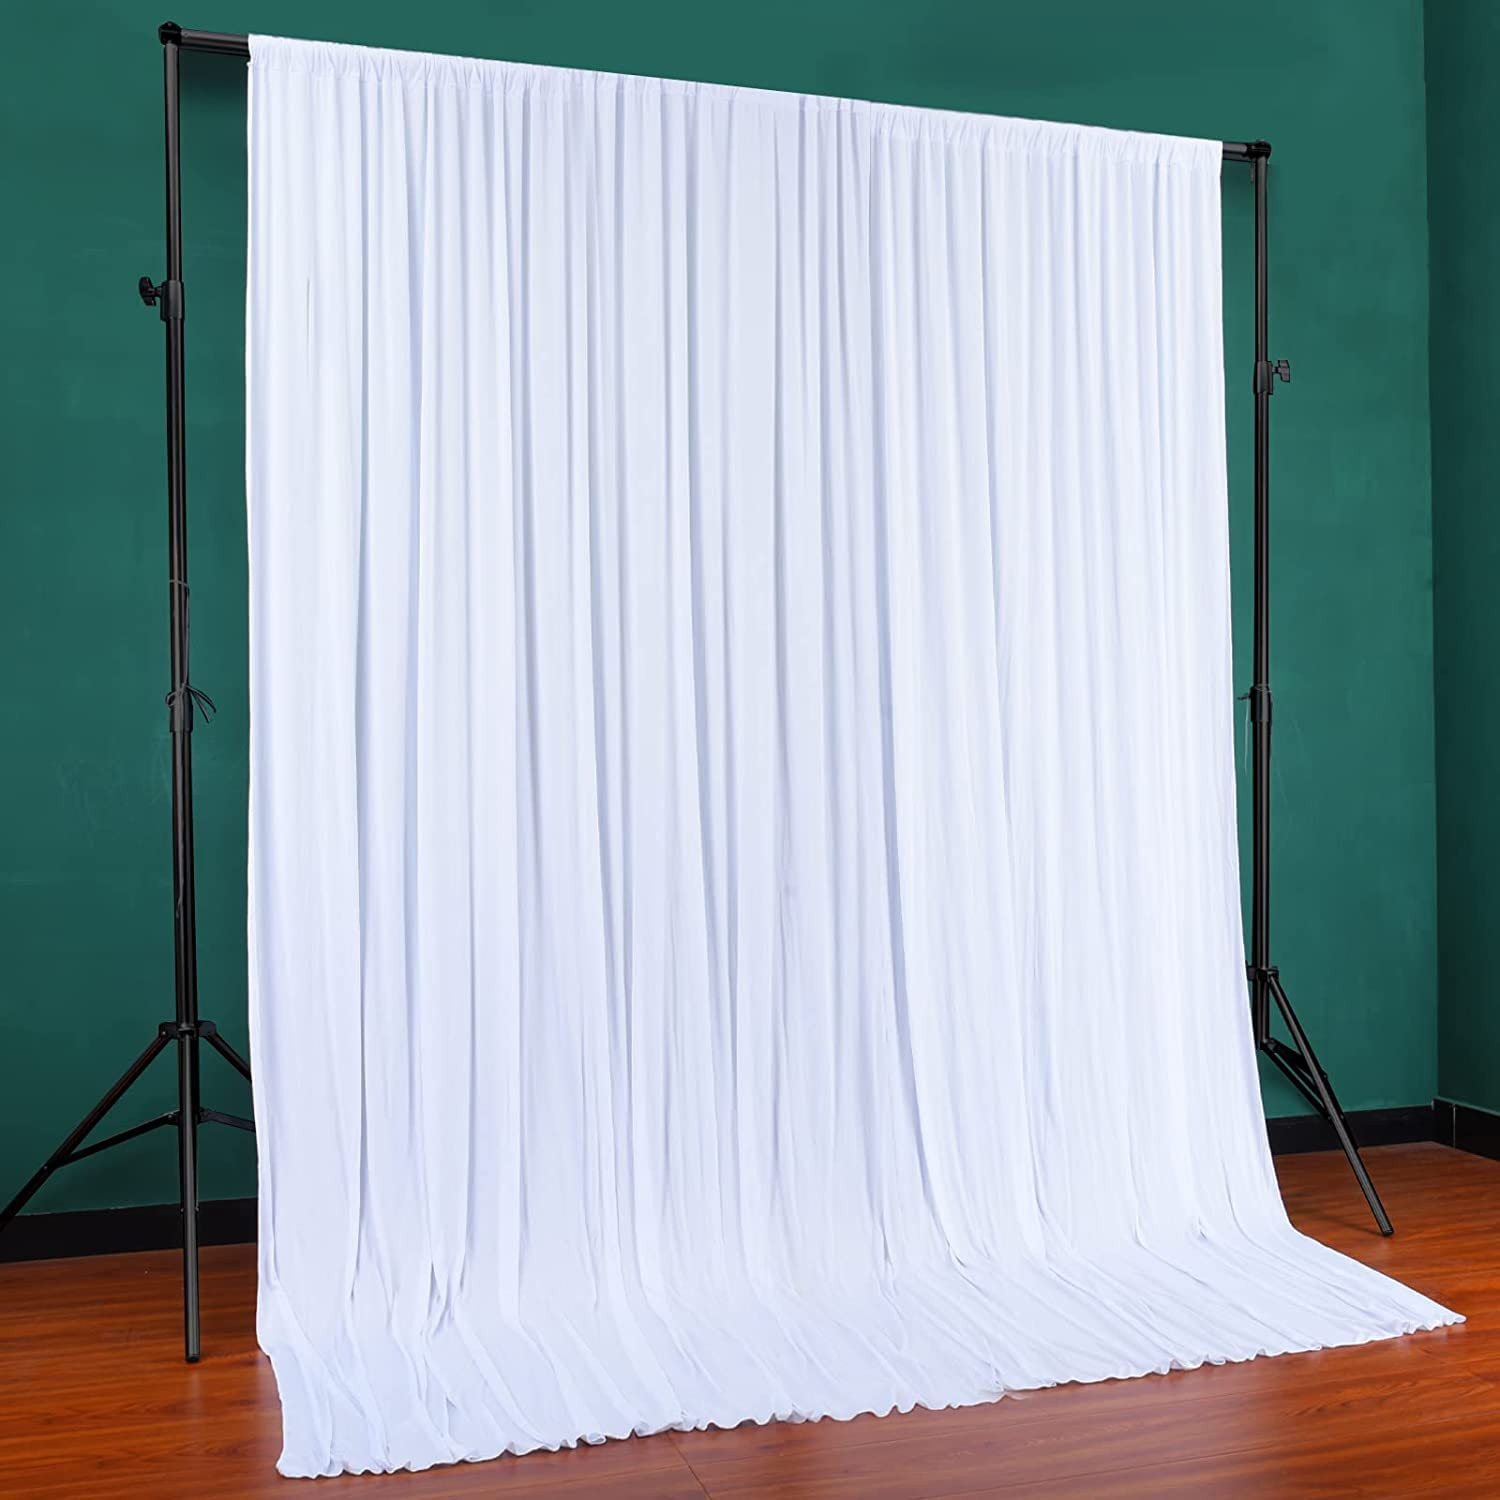 Boltove® White Wrinkle Free Decoration Backdrop Curtain Drapes White Backdrop Panels Background for Photography Wedding Parties Birthday Anniversary Function | Set of 2 |